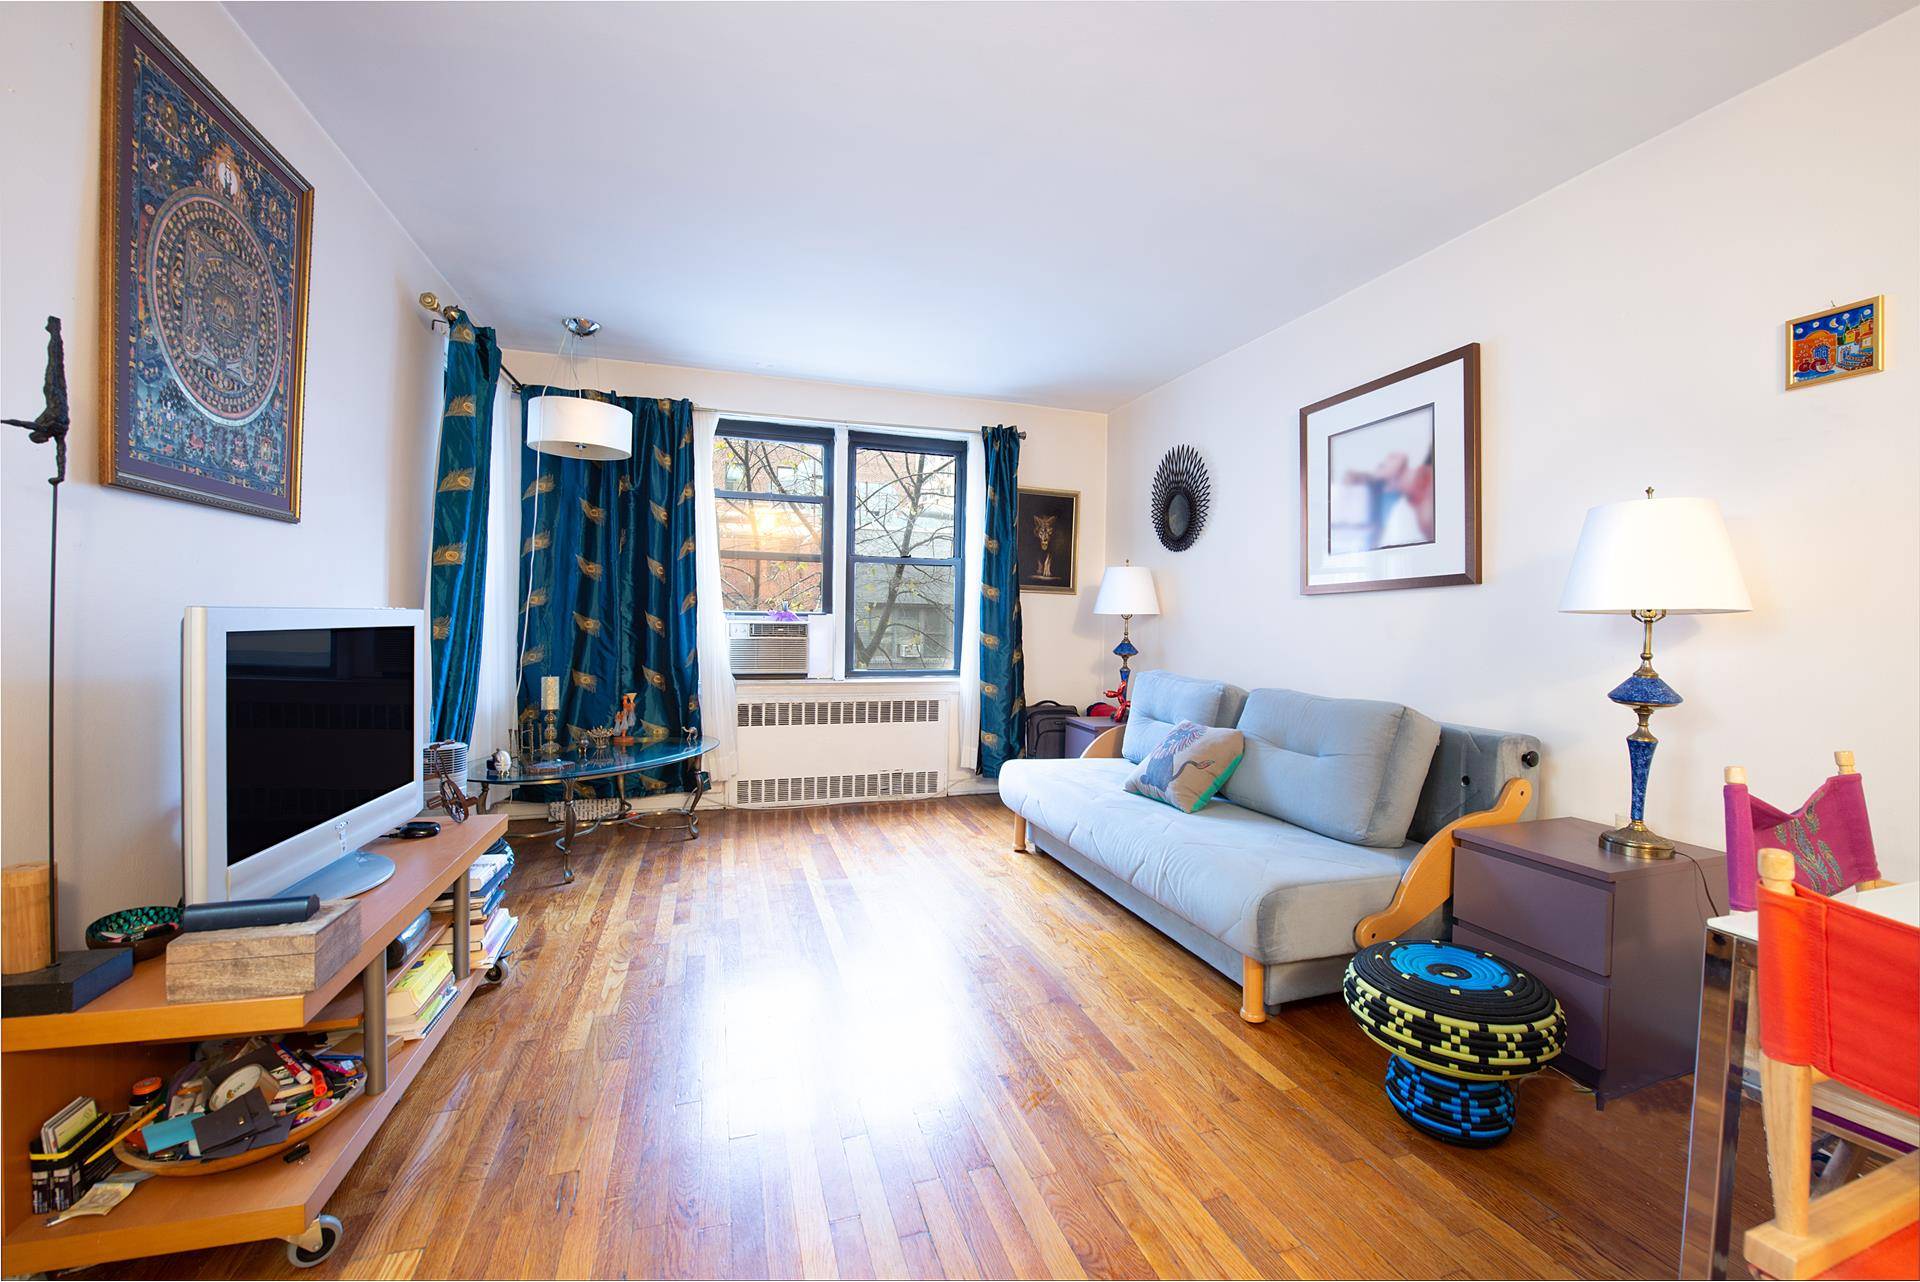 Here is a great opportunity to buy two adjacent Greenwich Village studios and create your own loft like home or divide into a two bedroom.